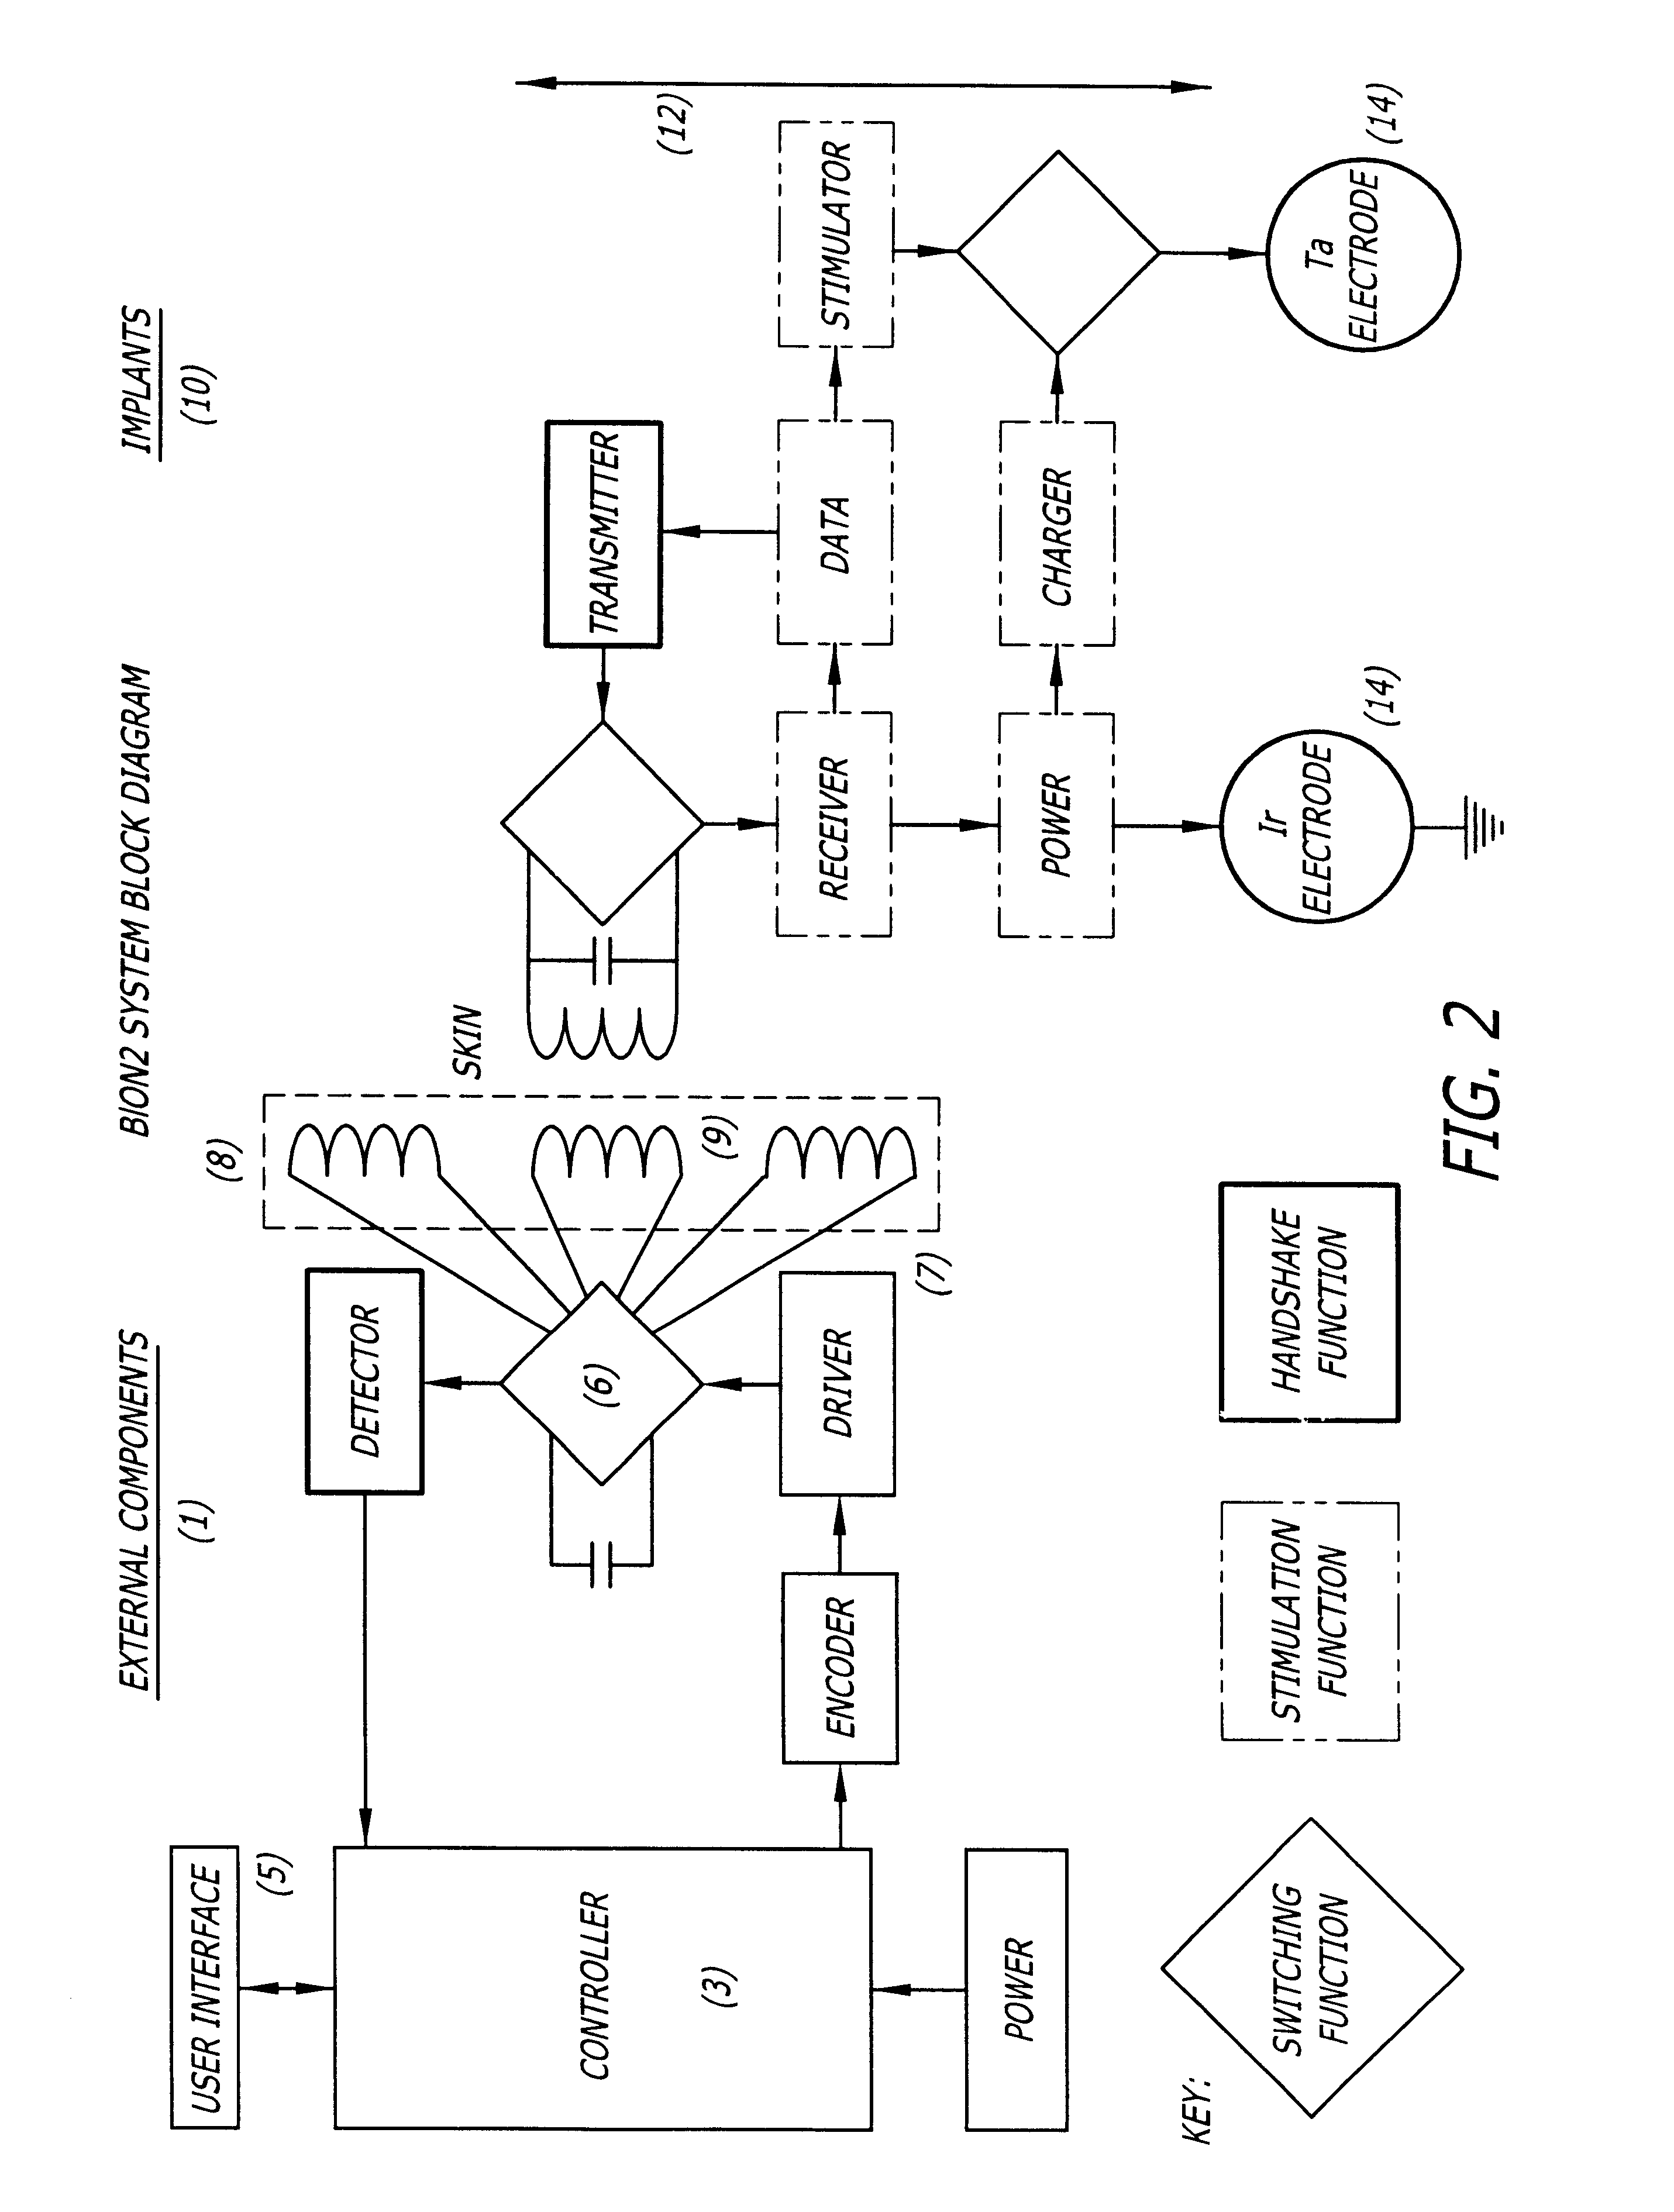 Method and apparatus for conditioning muscles during sleep